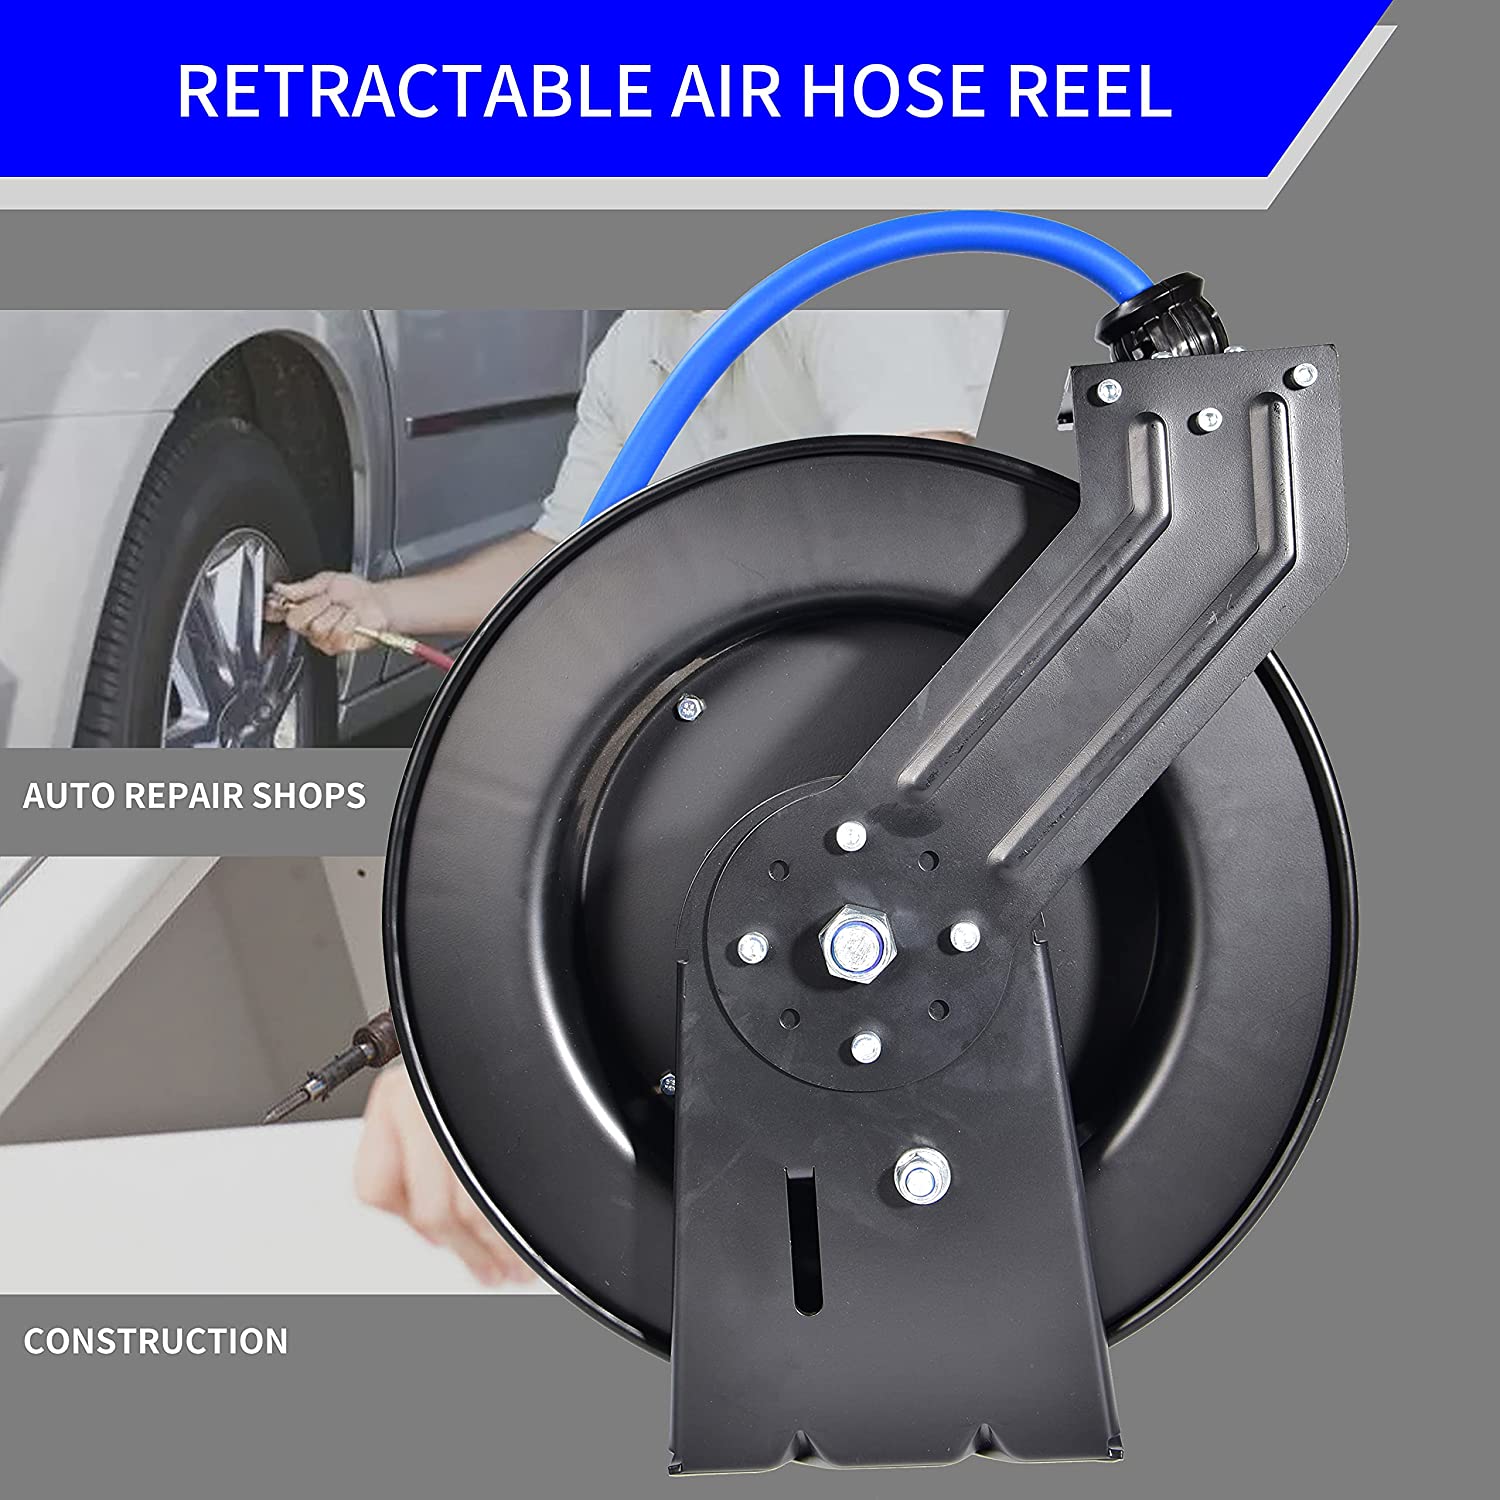 Aain AA039 Retractable Air Hose Reel with 3/8 inch x 50' ft, Heavy Duty Steel Hose Reel Auto Rewind Pneumatic, Black Industrial Grade Rubber Hose.